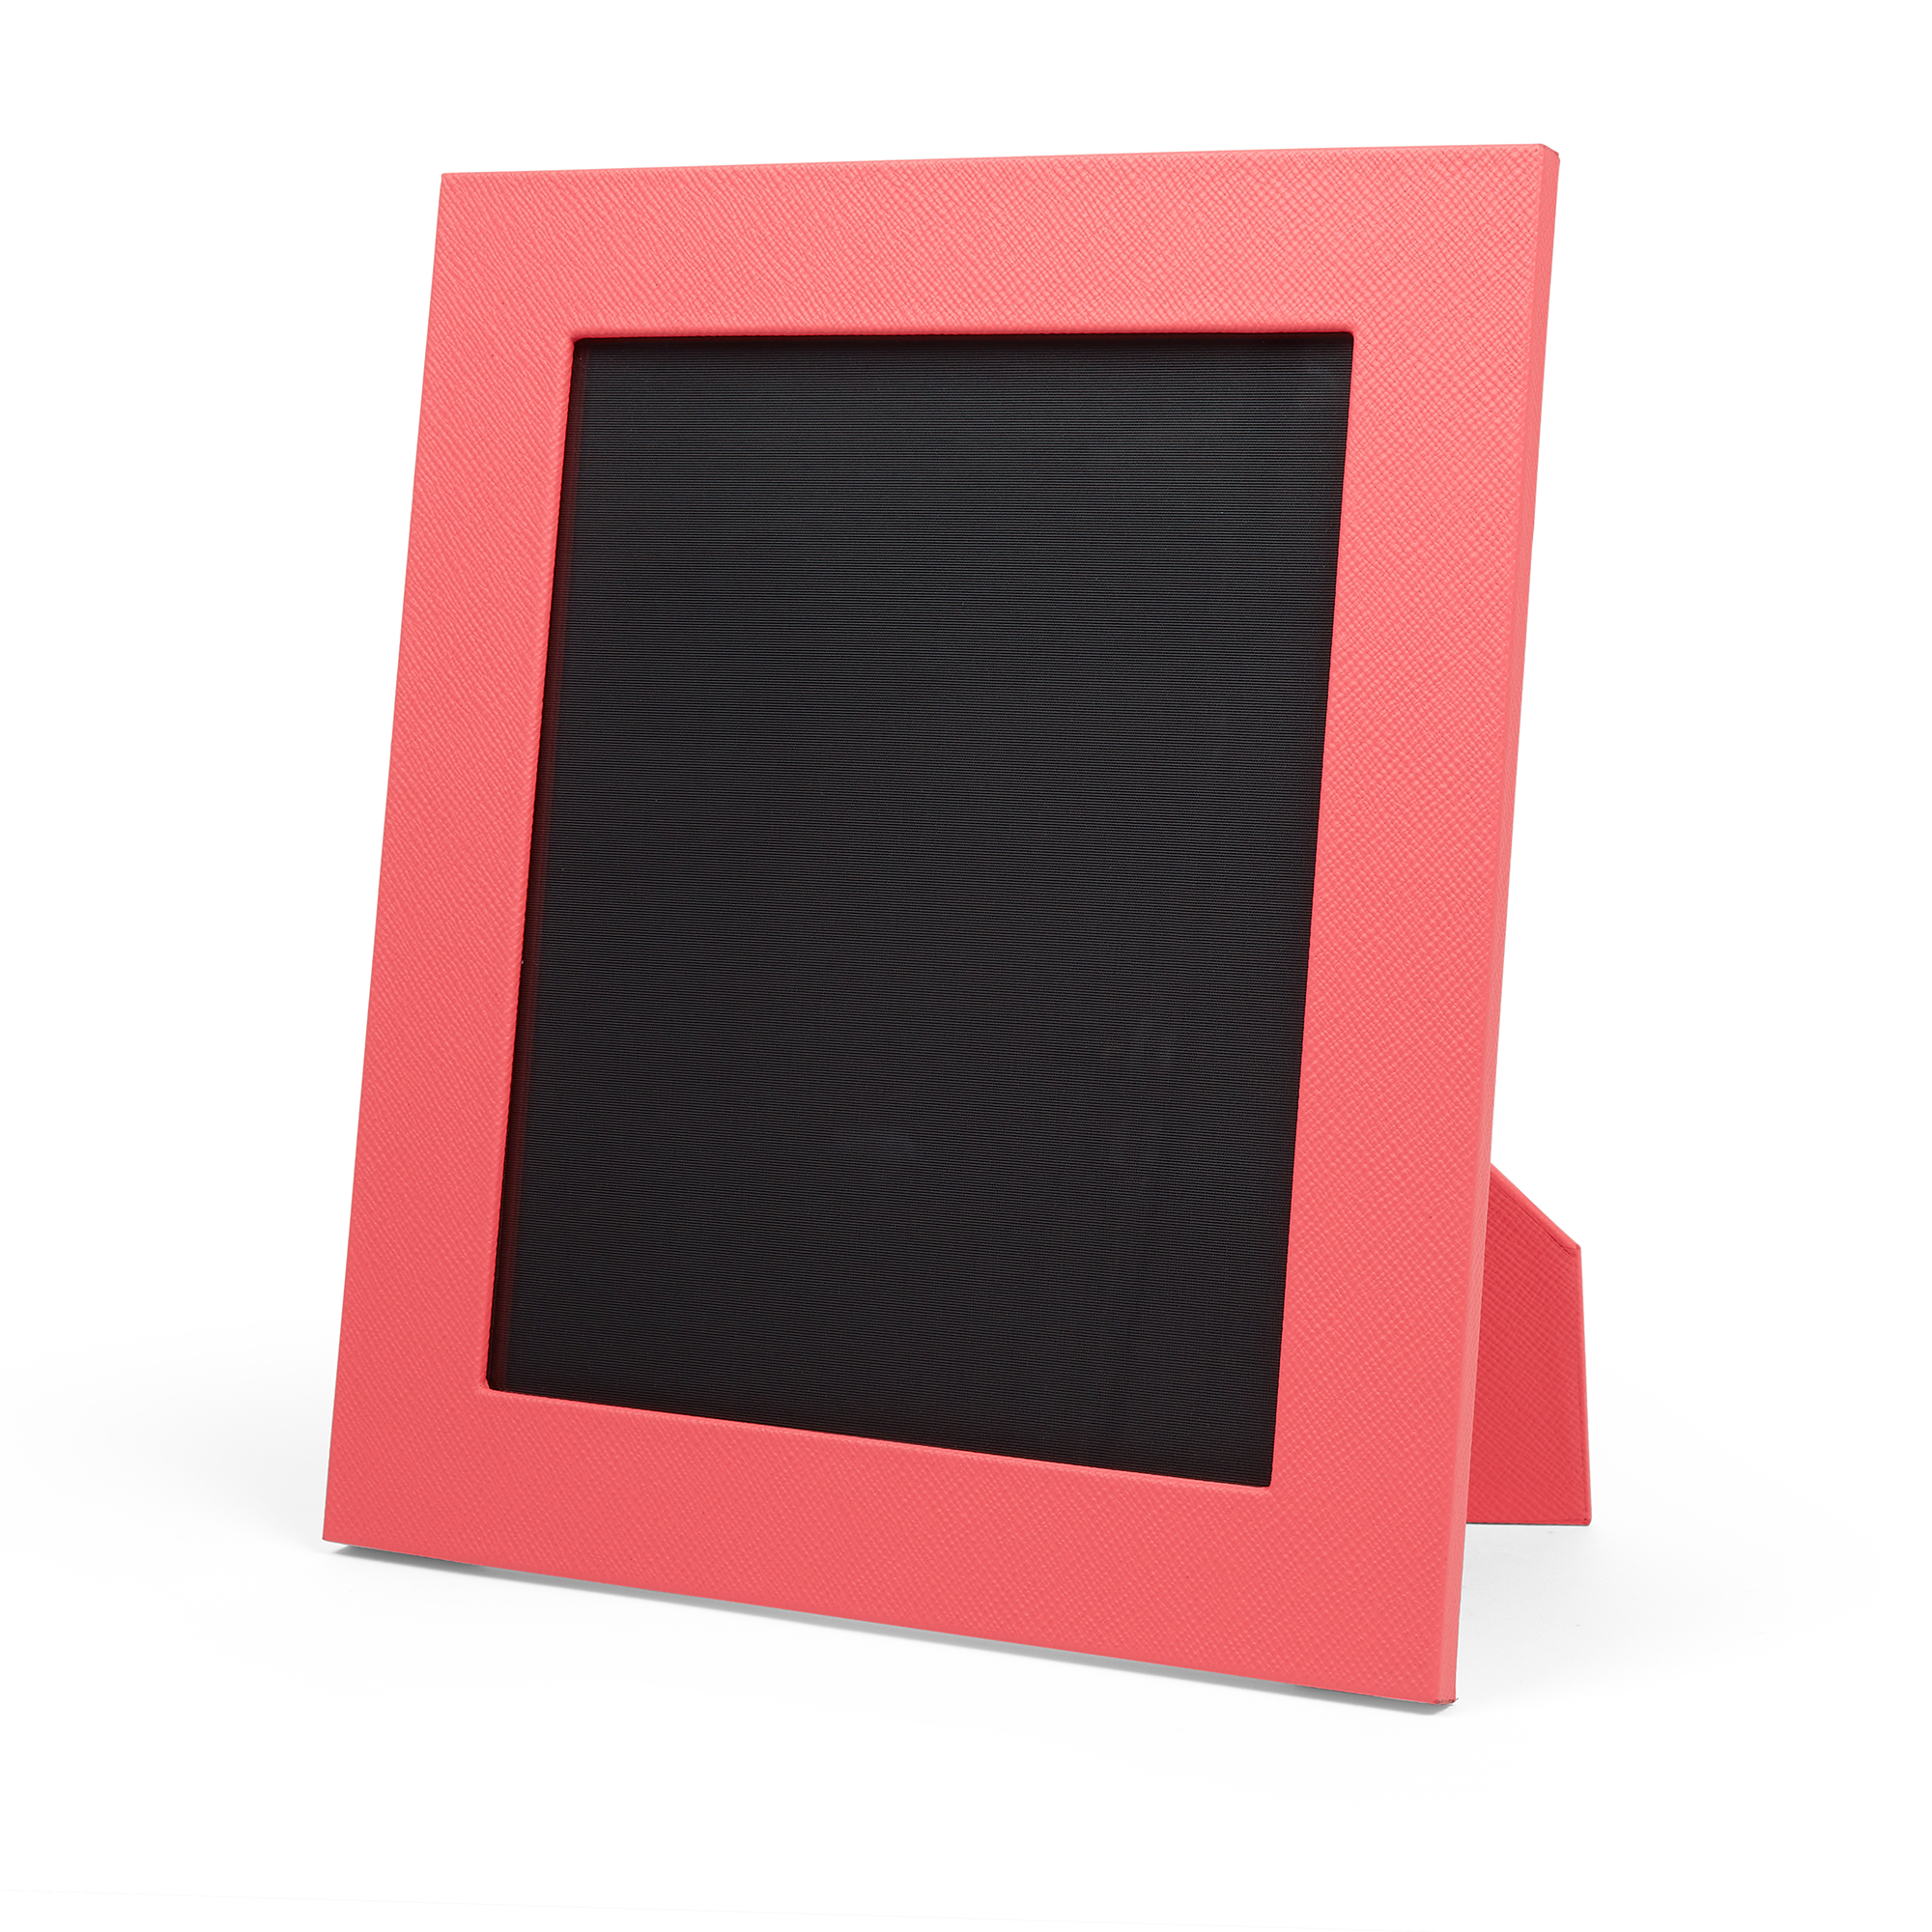 Smythson Large Photo Frame In Panama In Pink